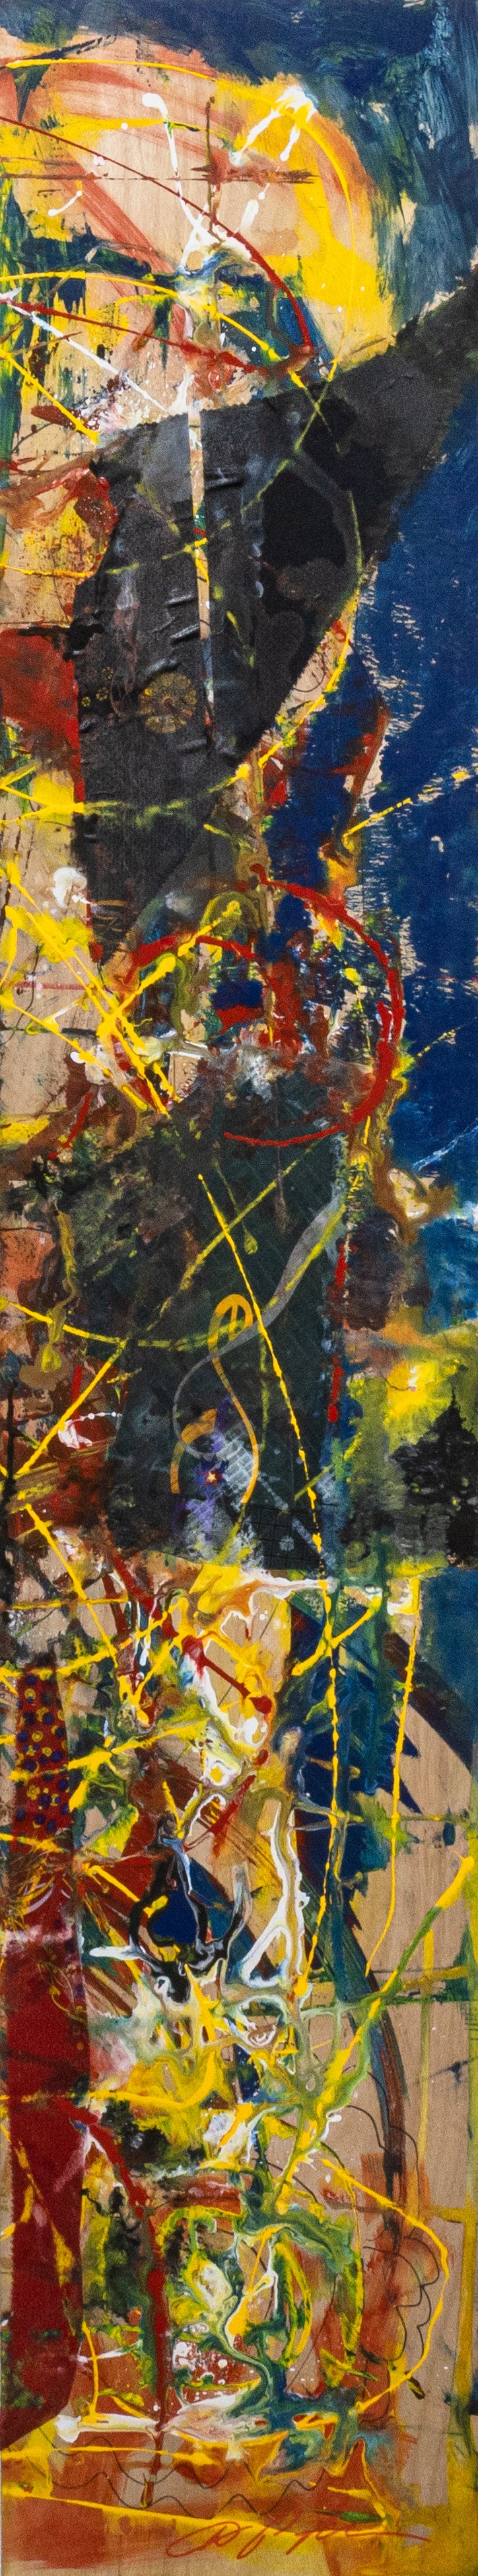 Dominic Pangborn Abstract Splatter I: An Homage to Pollock Painting